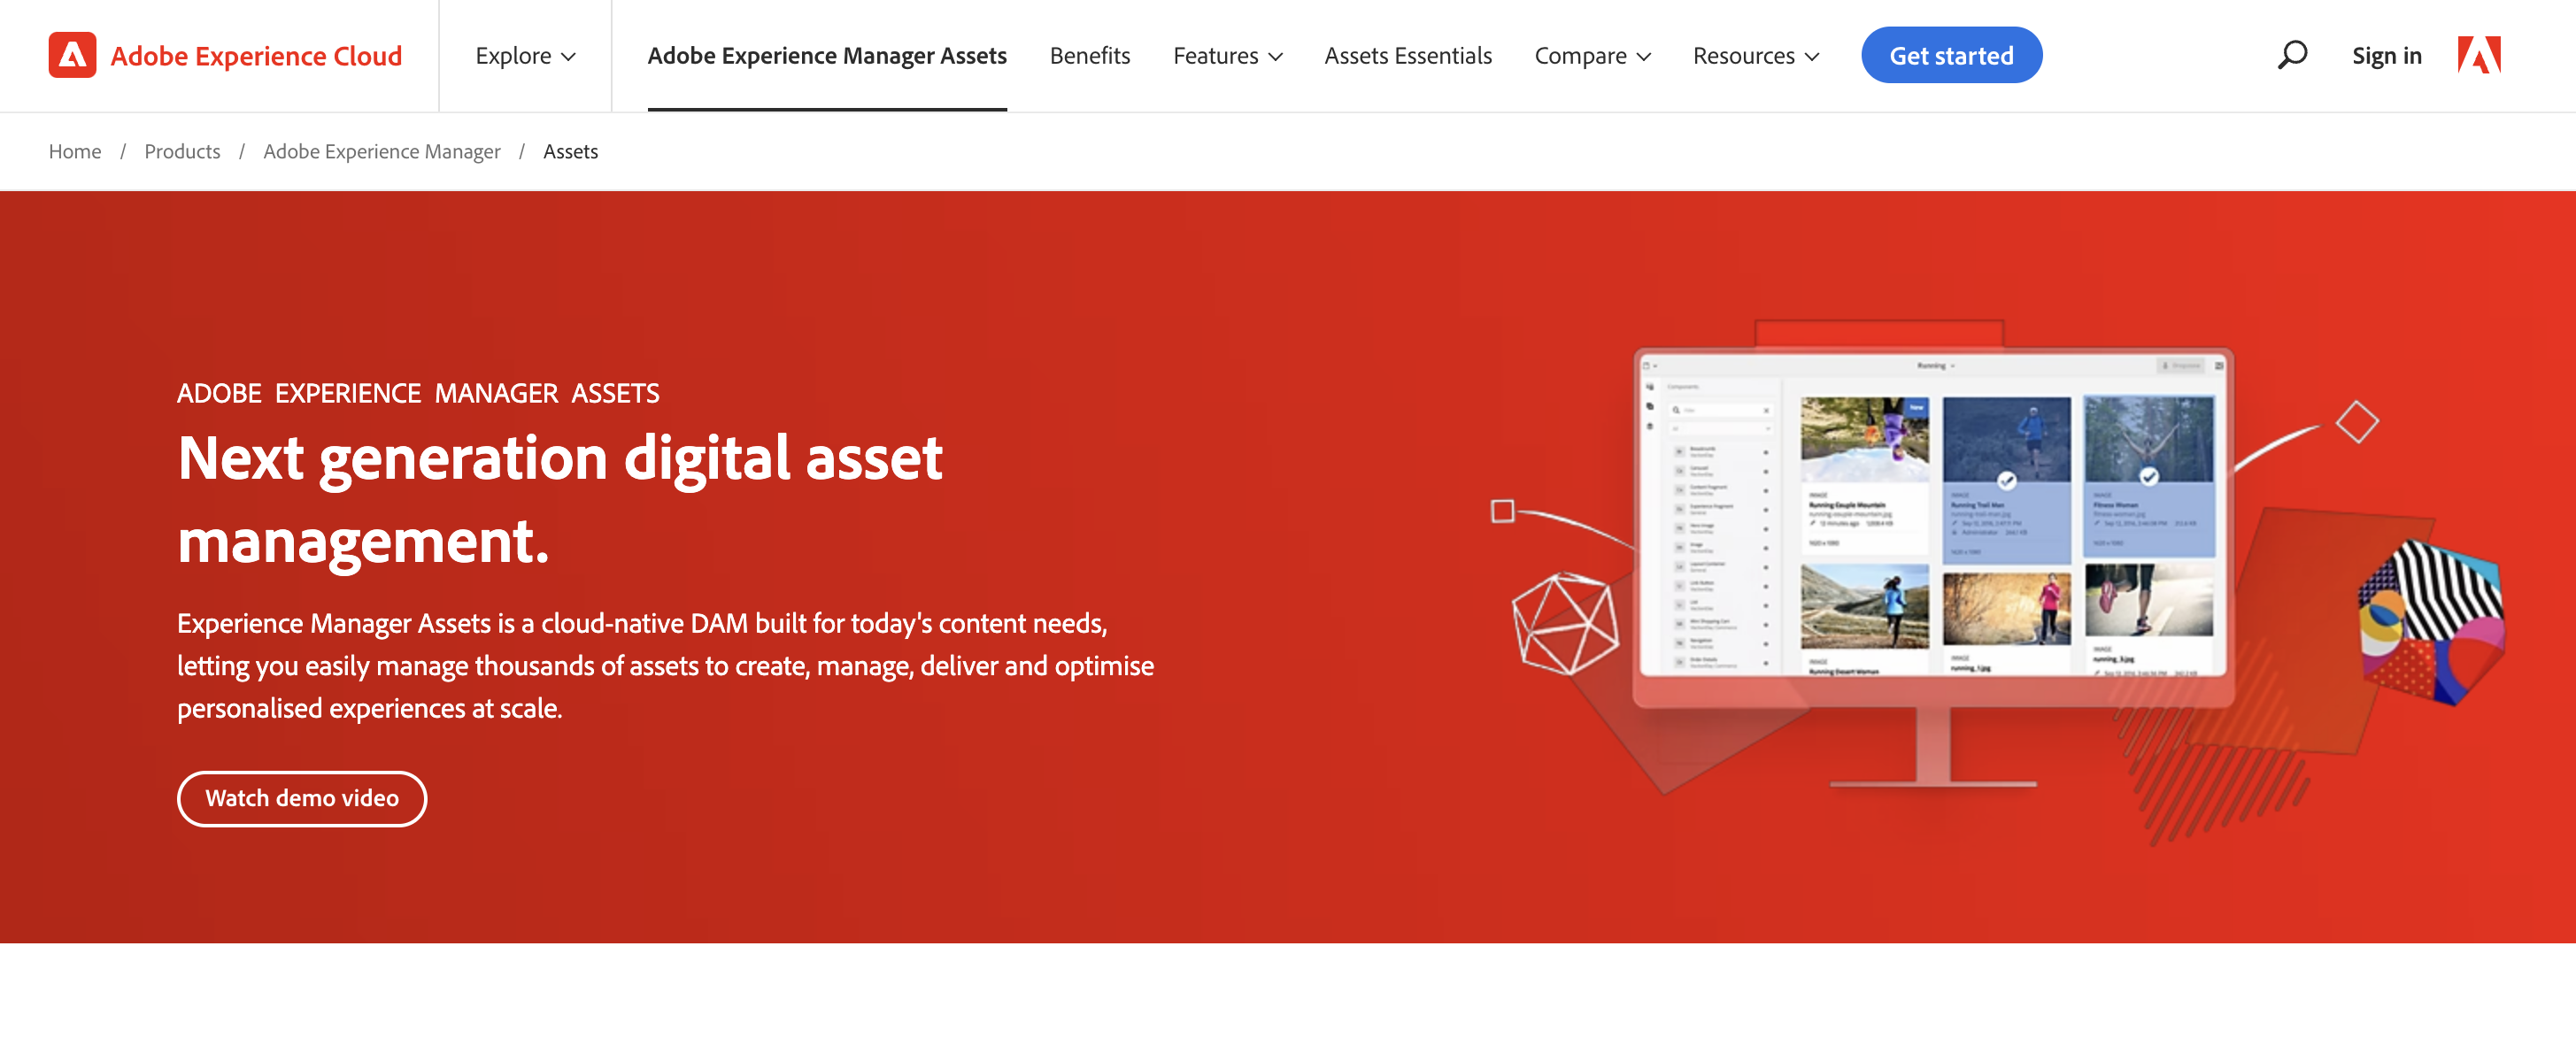 Adobe Experience Manager Asset